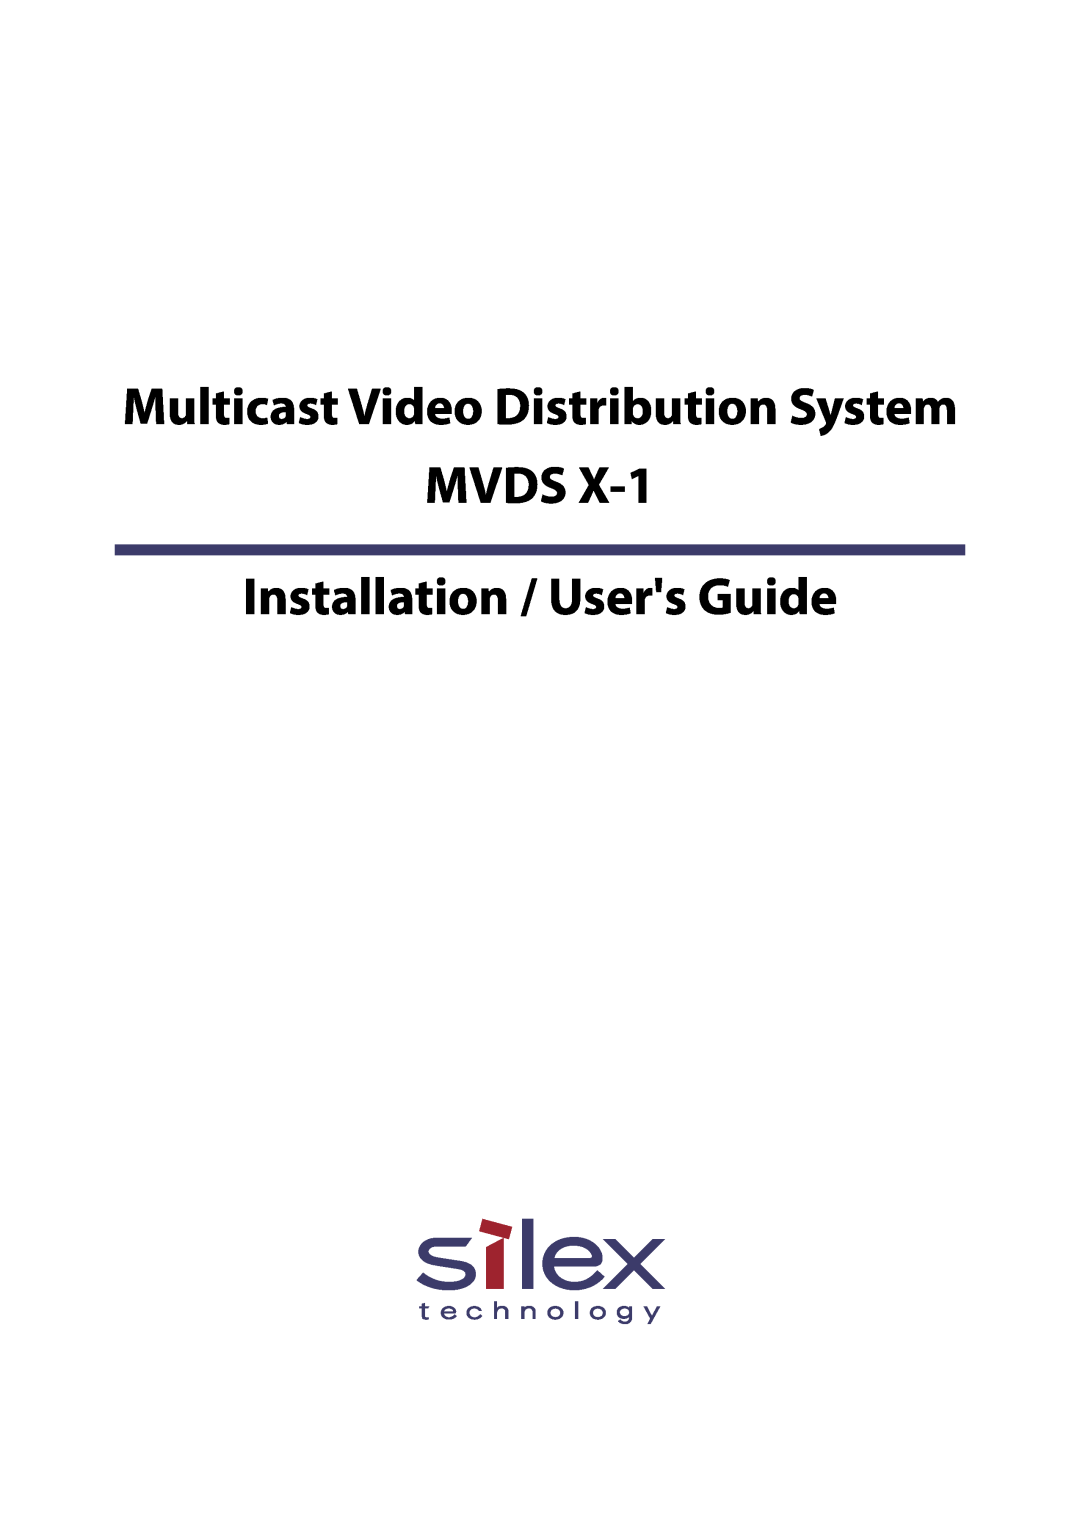 Silex technology MVDS X-1 manual Multicast Video Distribution System MVDS, Installation / Users Guide 